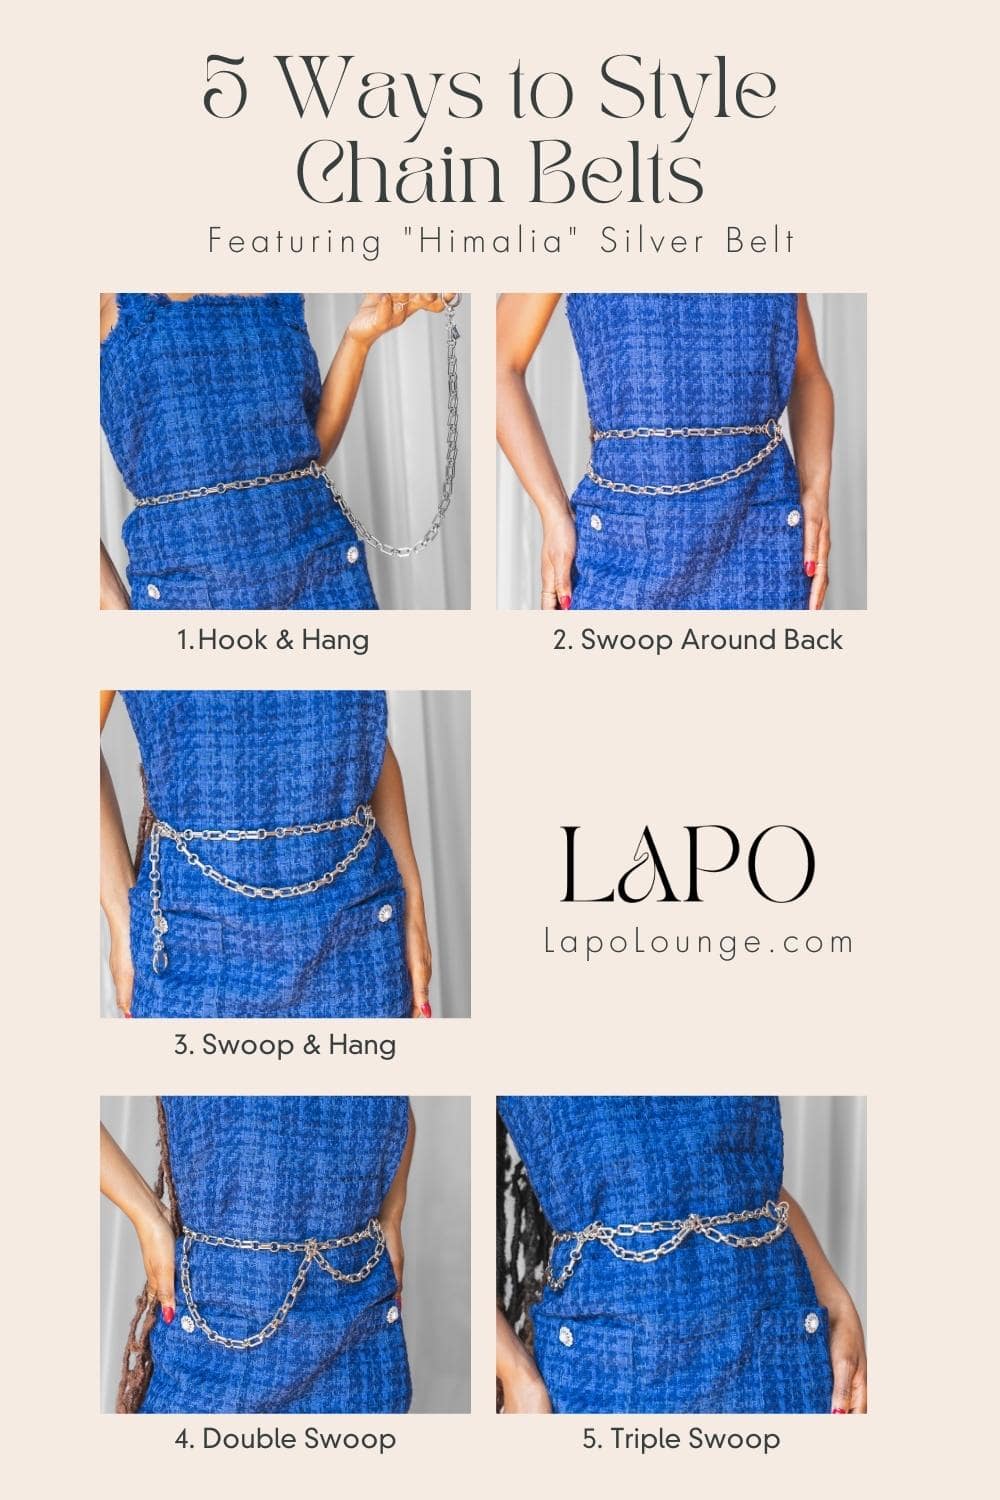 How To Style Chain Belts - 5 Easy Ways - OpalbyOpal